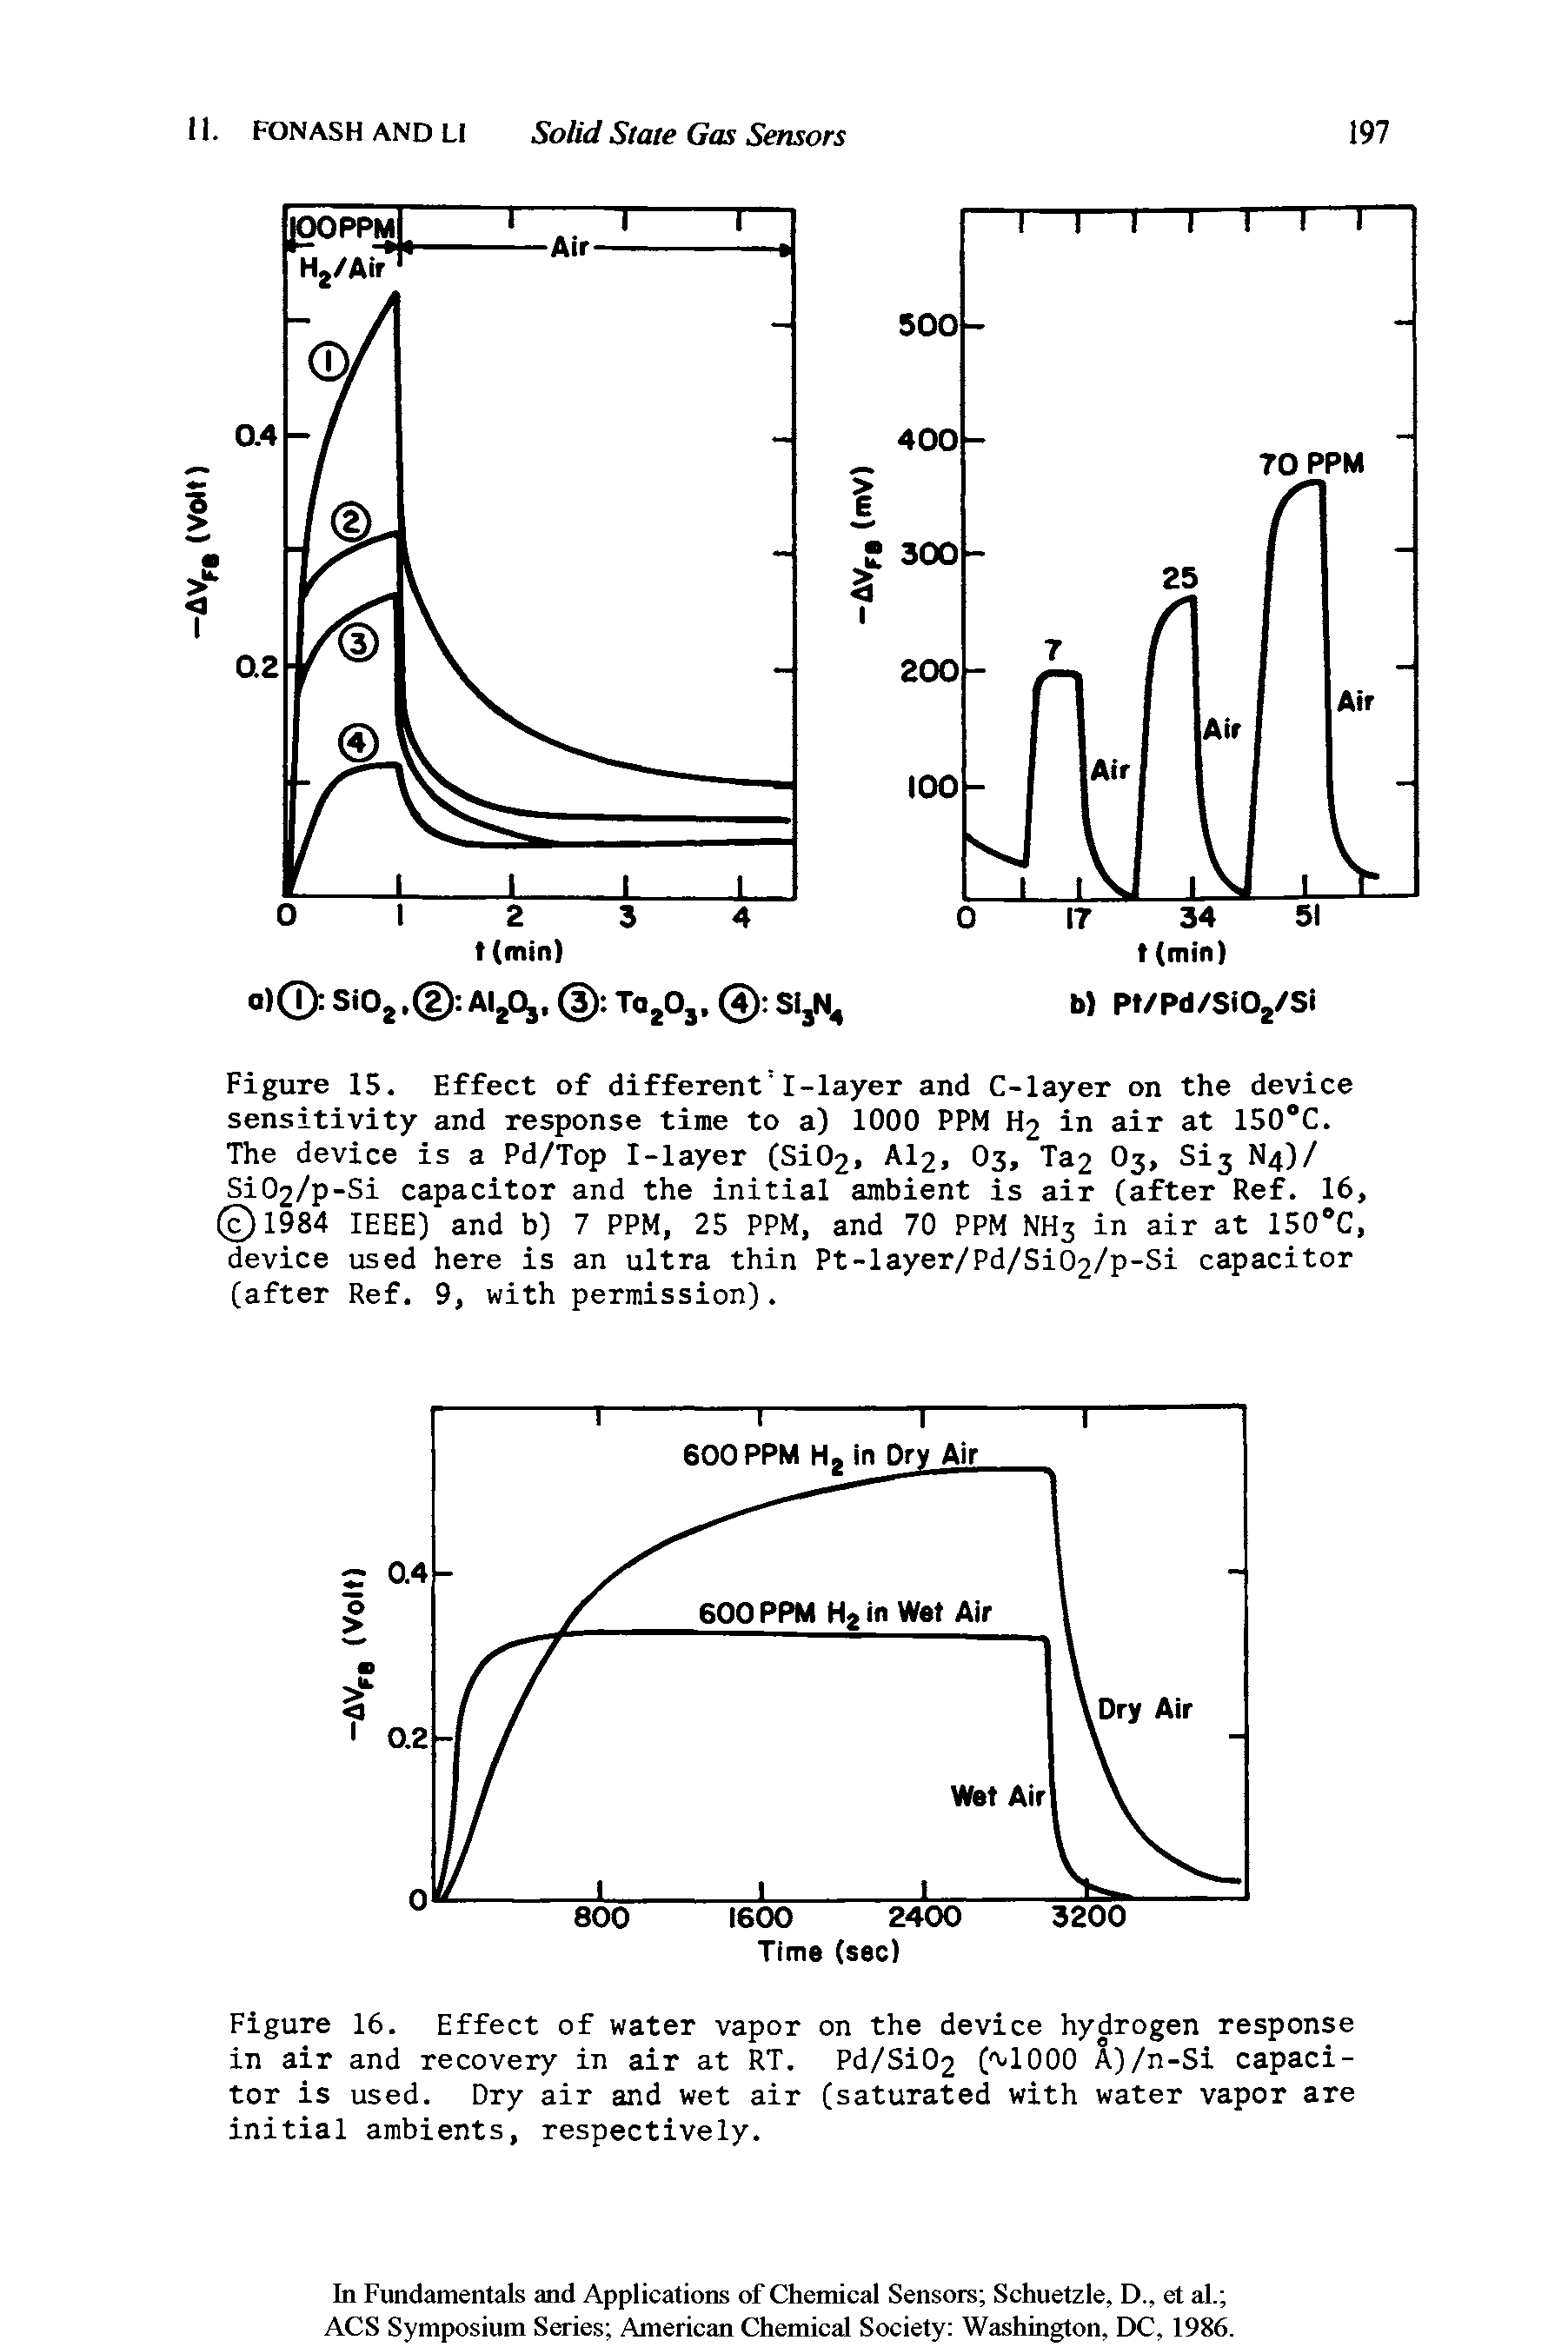 Figure 16. Effect of water vapor on the device hydrogen response in air and recovery in air at RT. Pd/Si02 ( -1000 A)/n-Si capacitor is used. Dry air and wet air (saturated with water vapor are initial ambients, respectively.